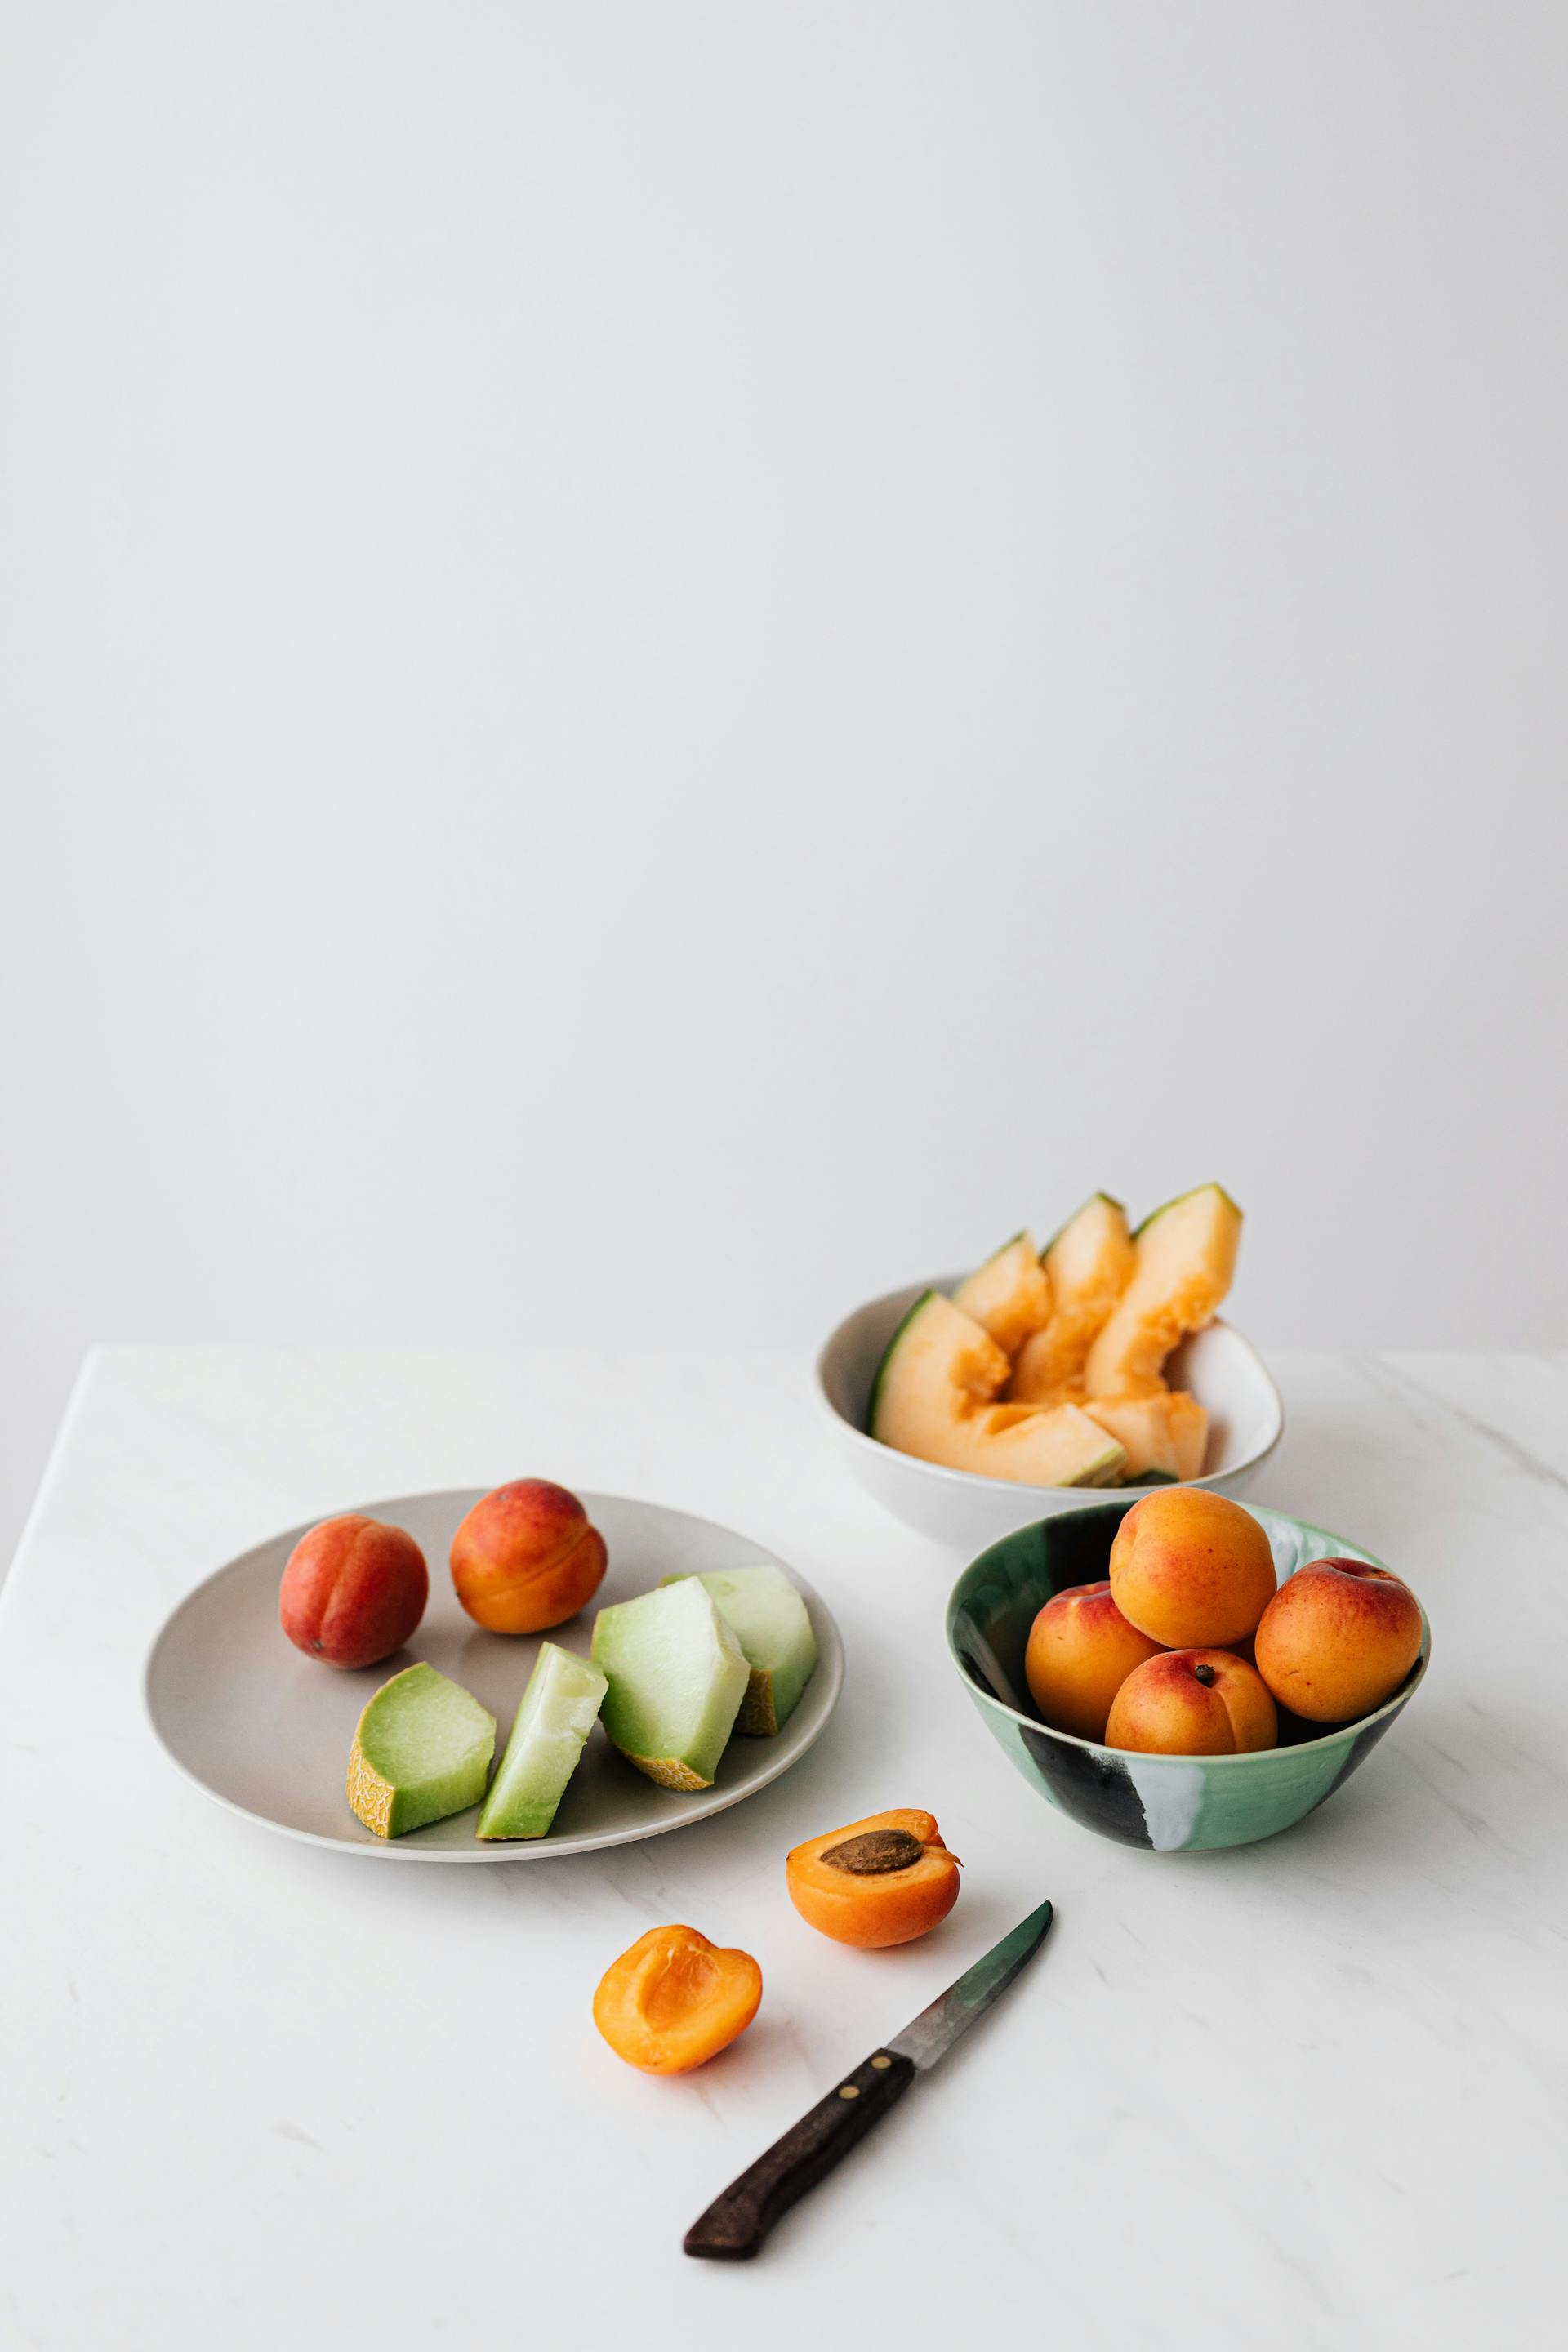 A selection of sliced fruit. For illustration purposes only  | Source: Pexels